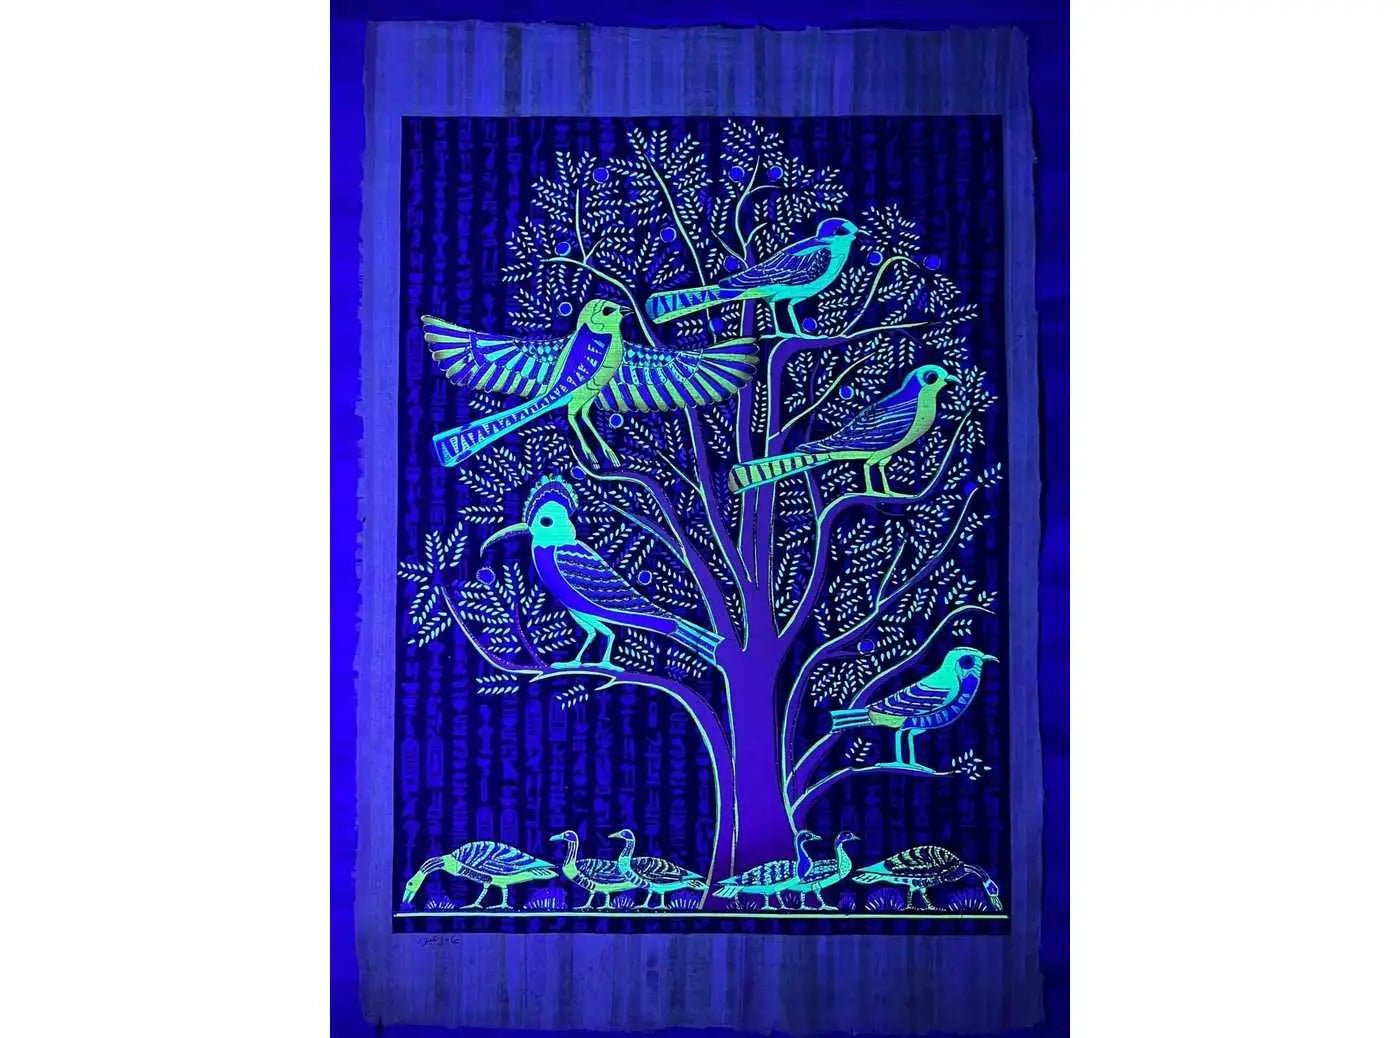 Wallart Decor Ancient Egyptian Painting - Tree of Life Egypt Art on Handmade Papyrus, Hand Painting by Adel Ghabour Glow in Dark